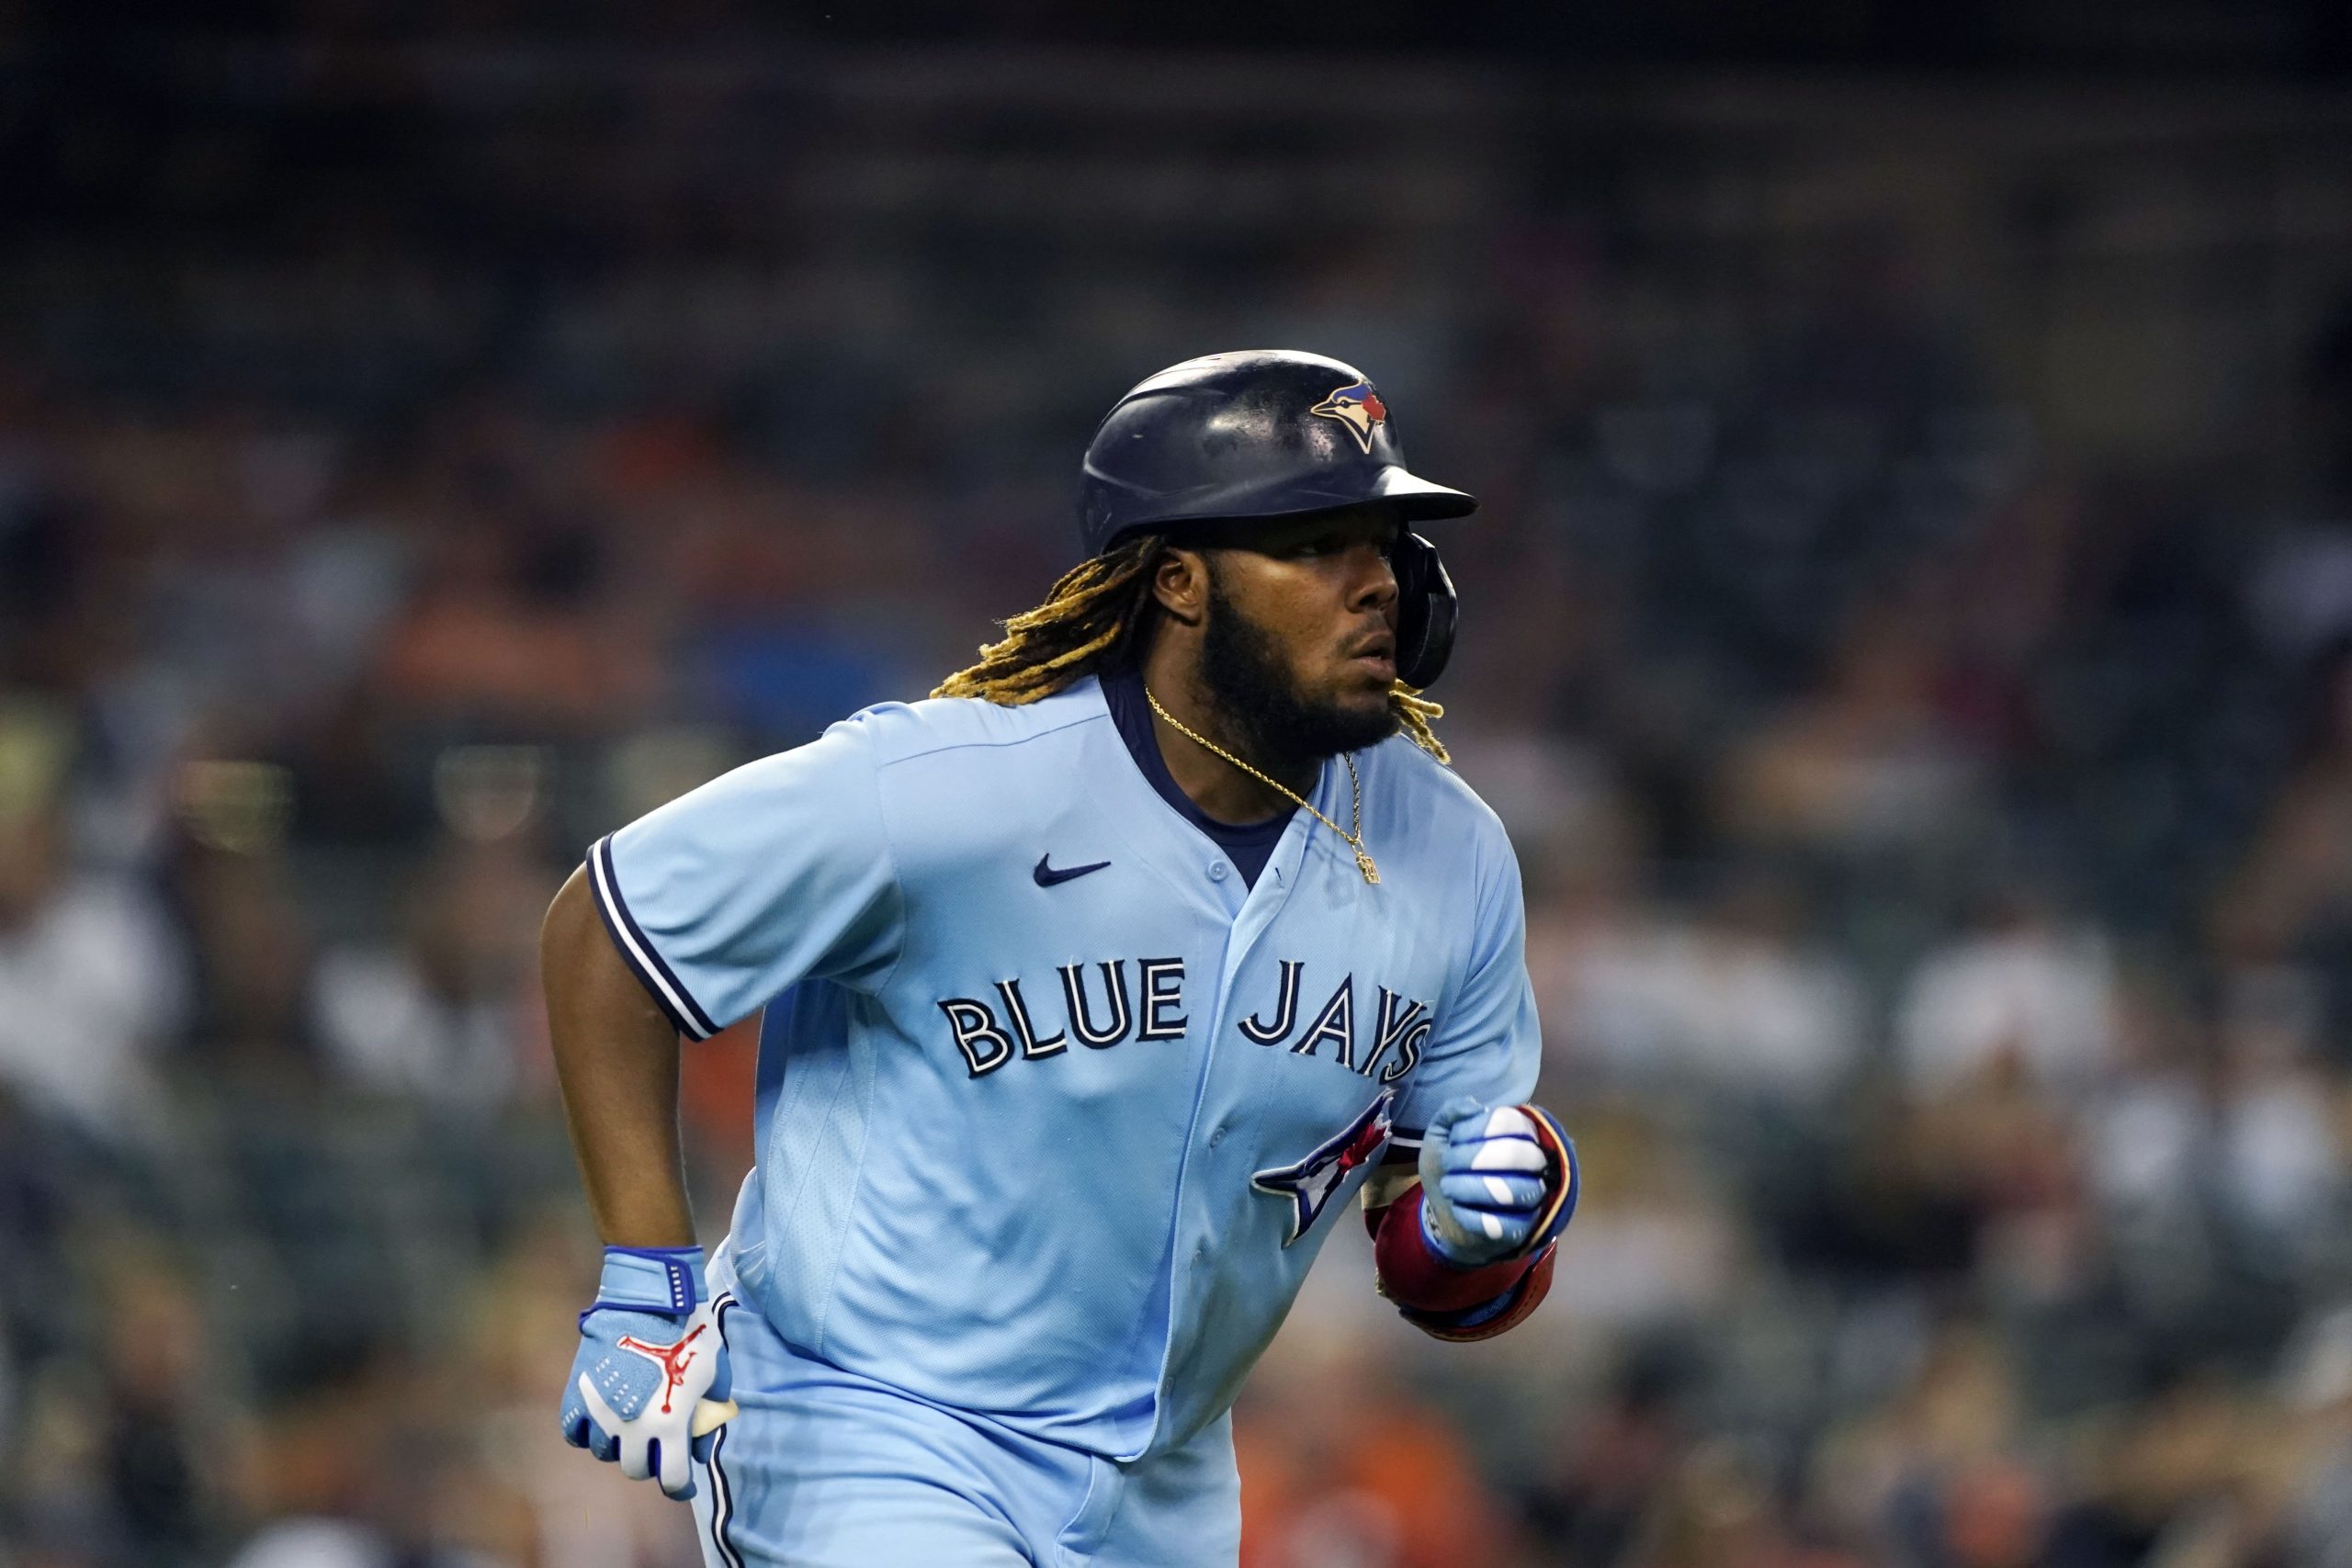 Toronto Blue Jays designated hitter Vladimir Guerrero Jr. runs to first on a single during the seventh inning of a baseball game against the Detroit Tigers, Saturday, Aug. 28, 2021, in Detroit.